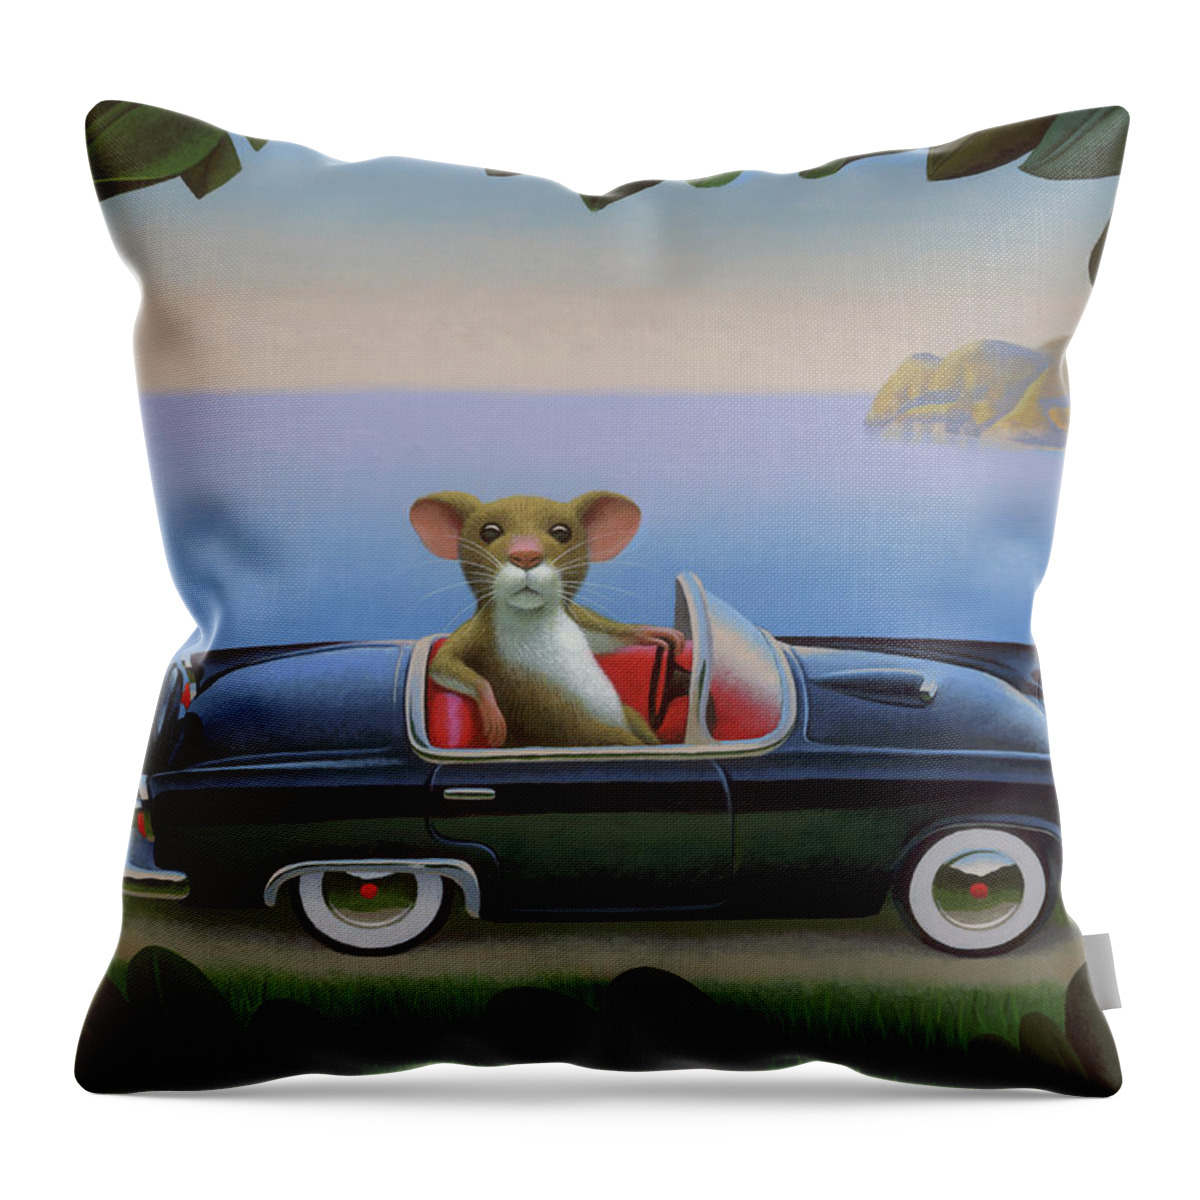 Mouse Throw Pillow featuring the painting Mouster by Chris Miles